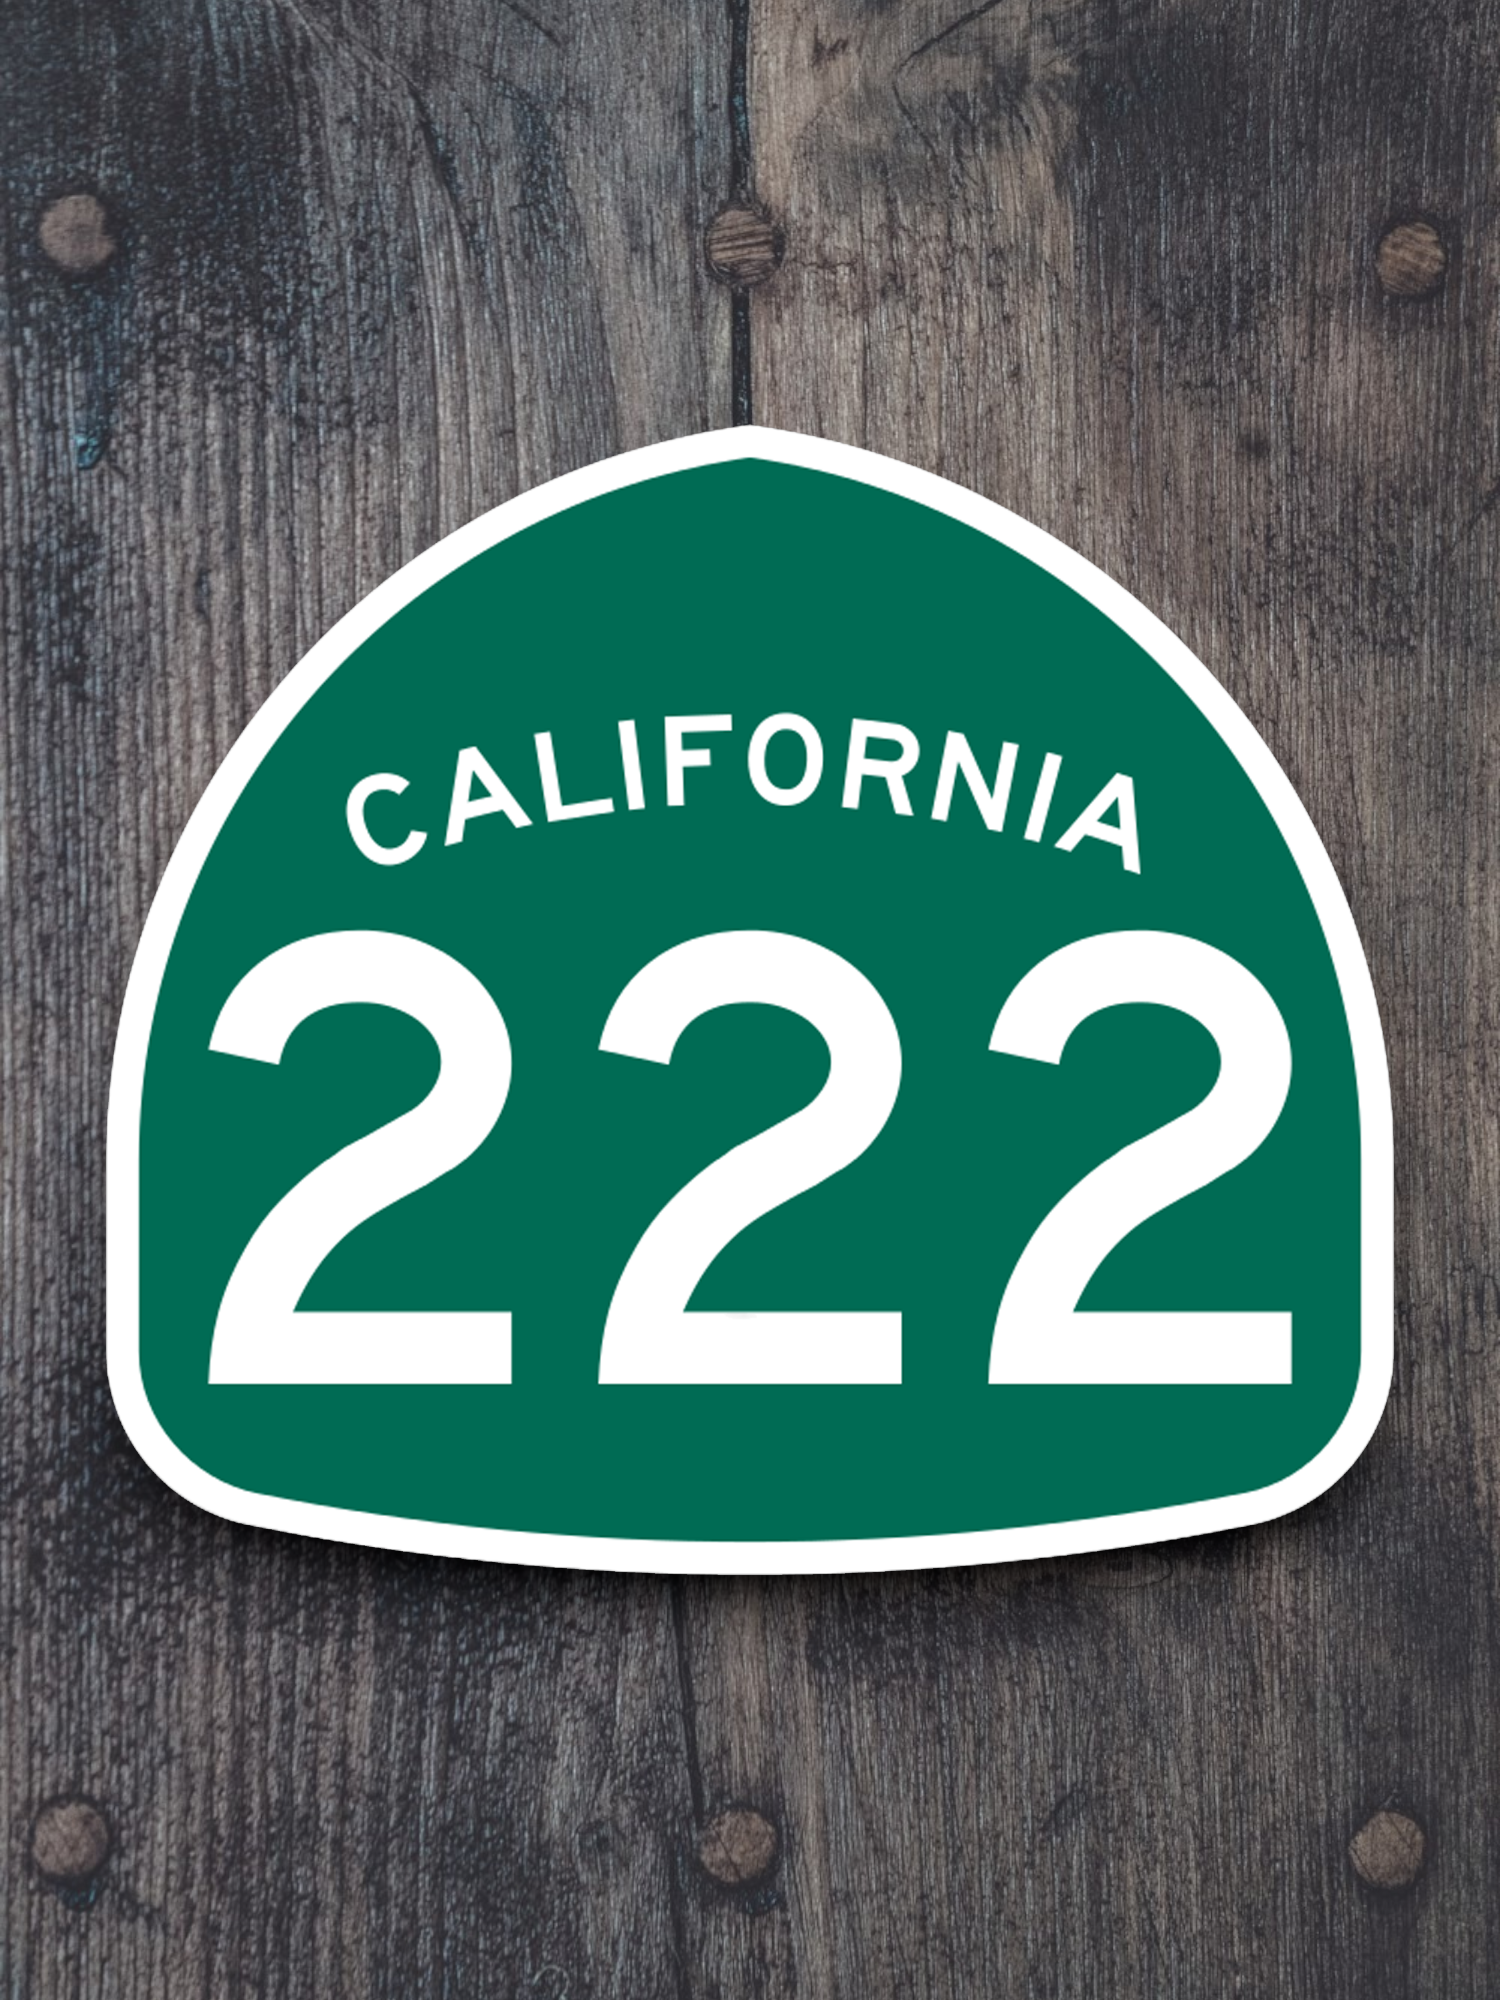 California State Route 222 Road Sign Sticker